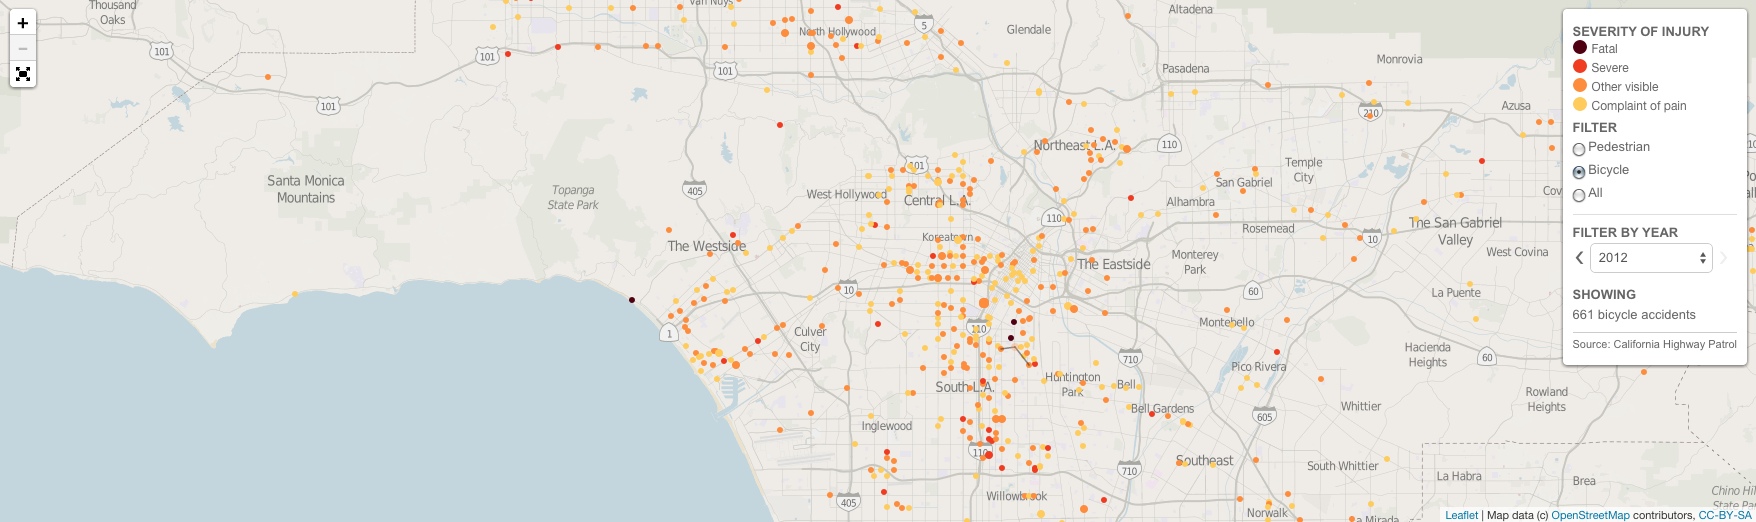 Locations of hit-and-run accidents in and around LA